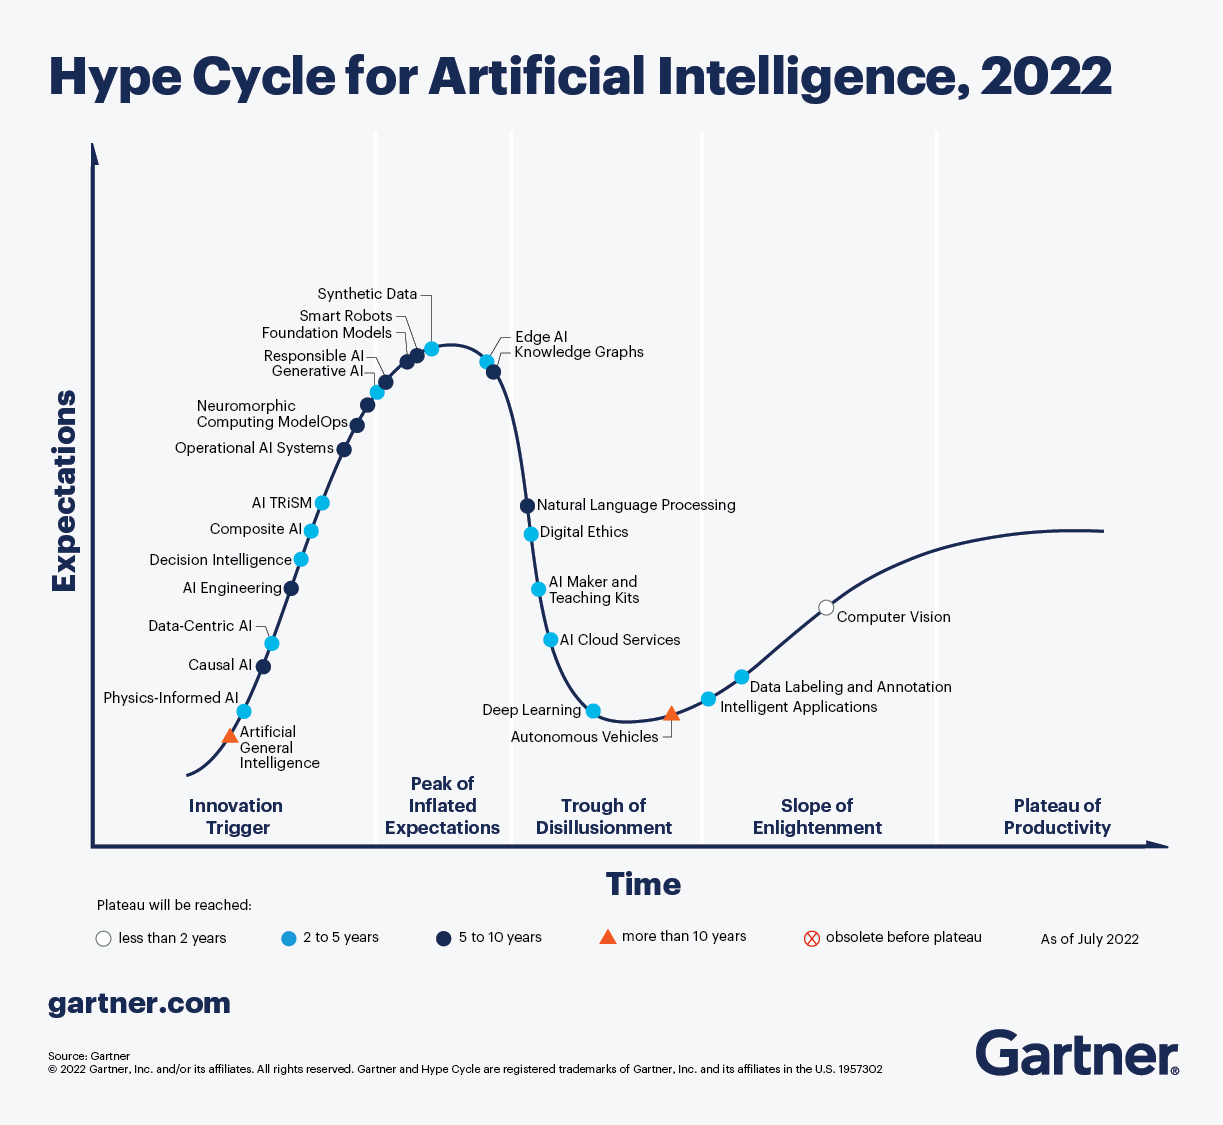 hype-cycle-for-artificial-intelligence-2022